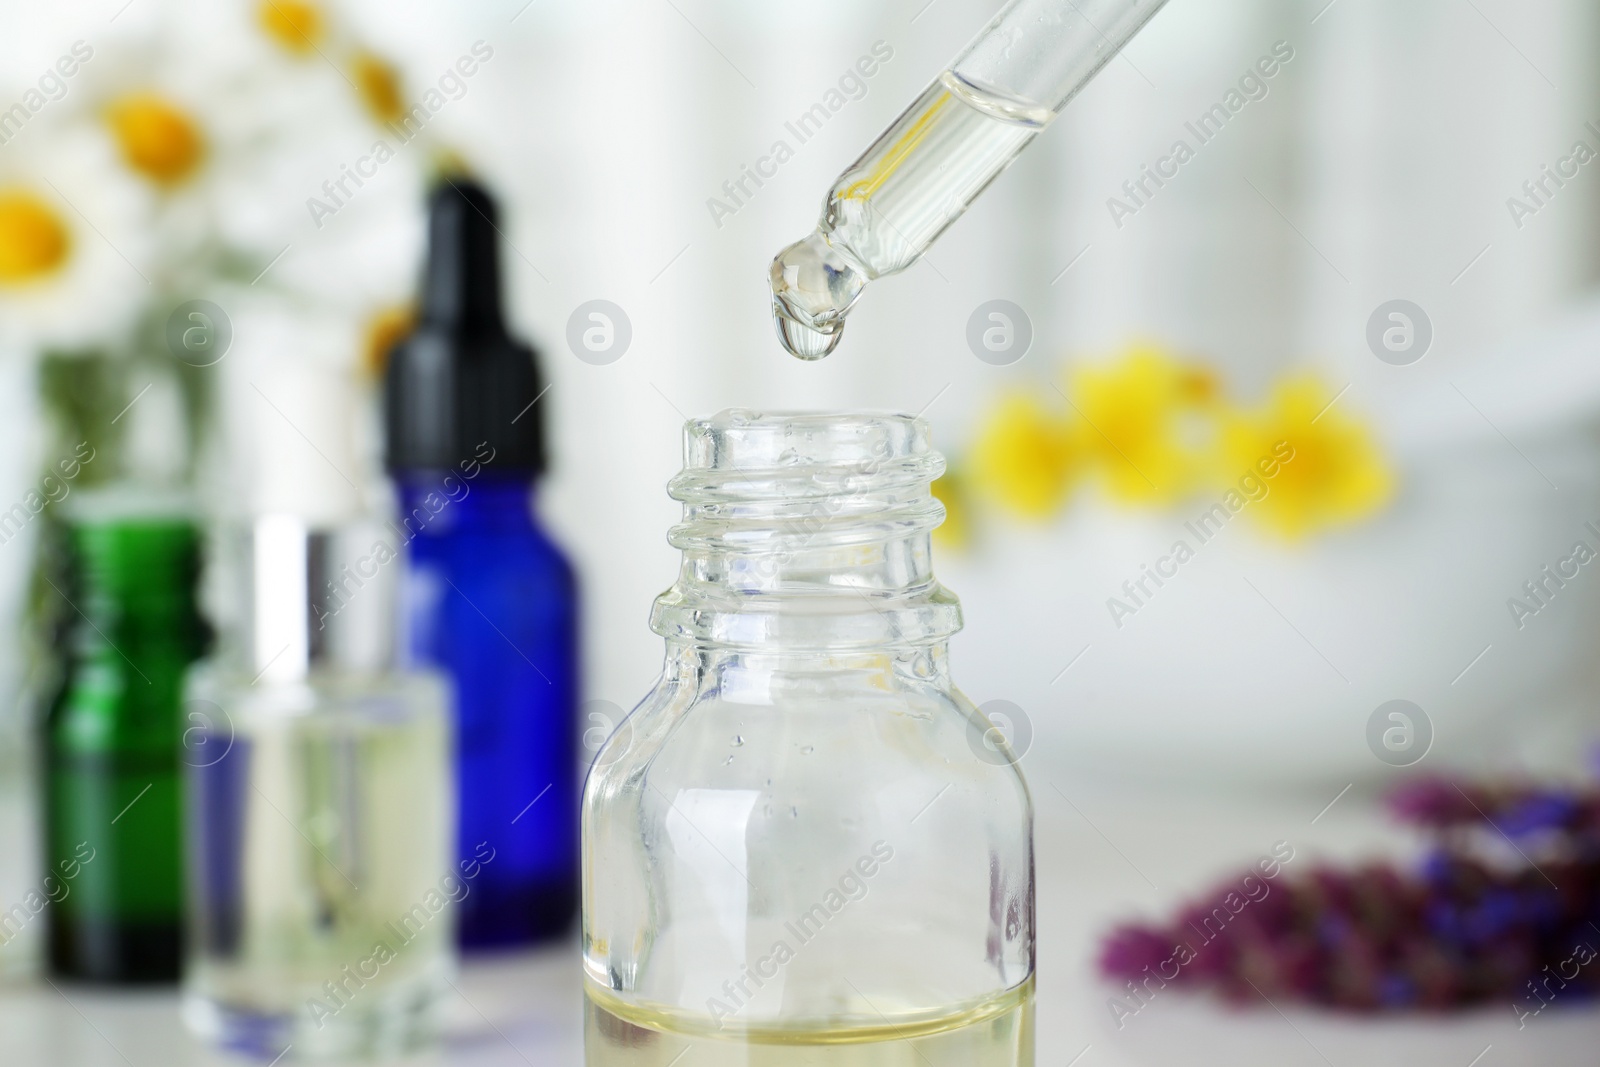 Photo of Dropping essential oil into bottle on blurred background, closeup